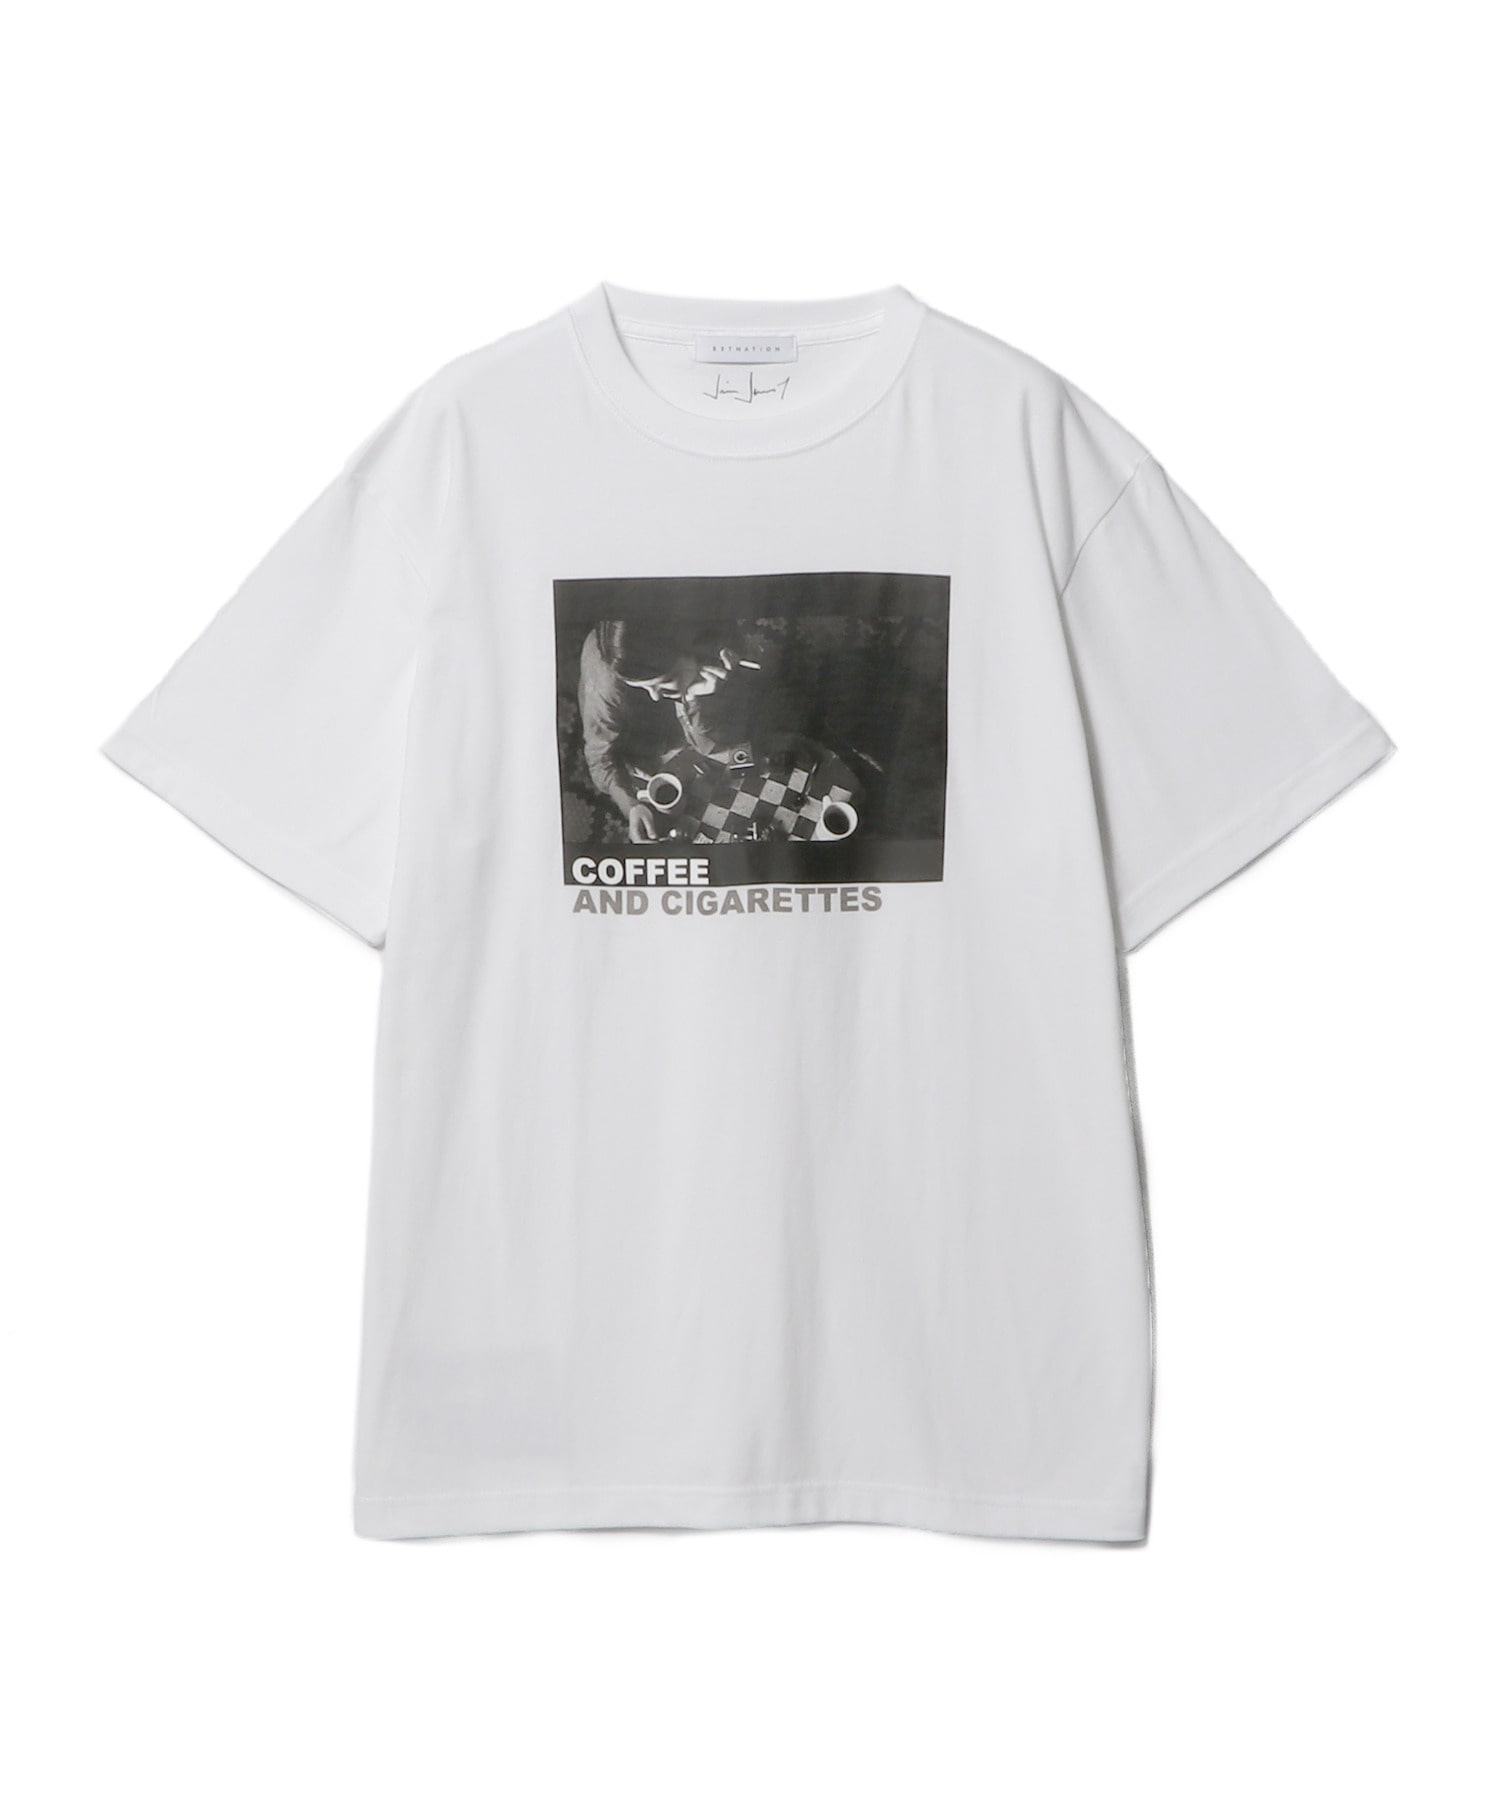 ESTNATION / ”Coffee and Cigarettes” Men'sプリントカットソー＜Jim Jarmusch＞